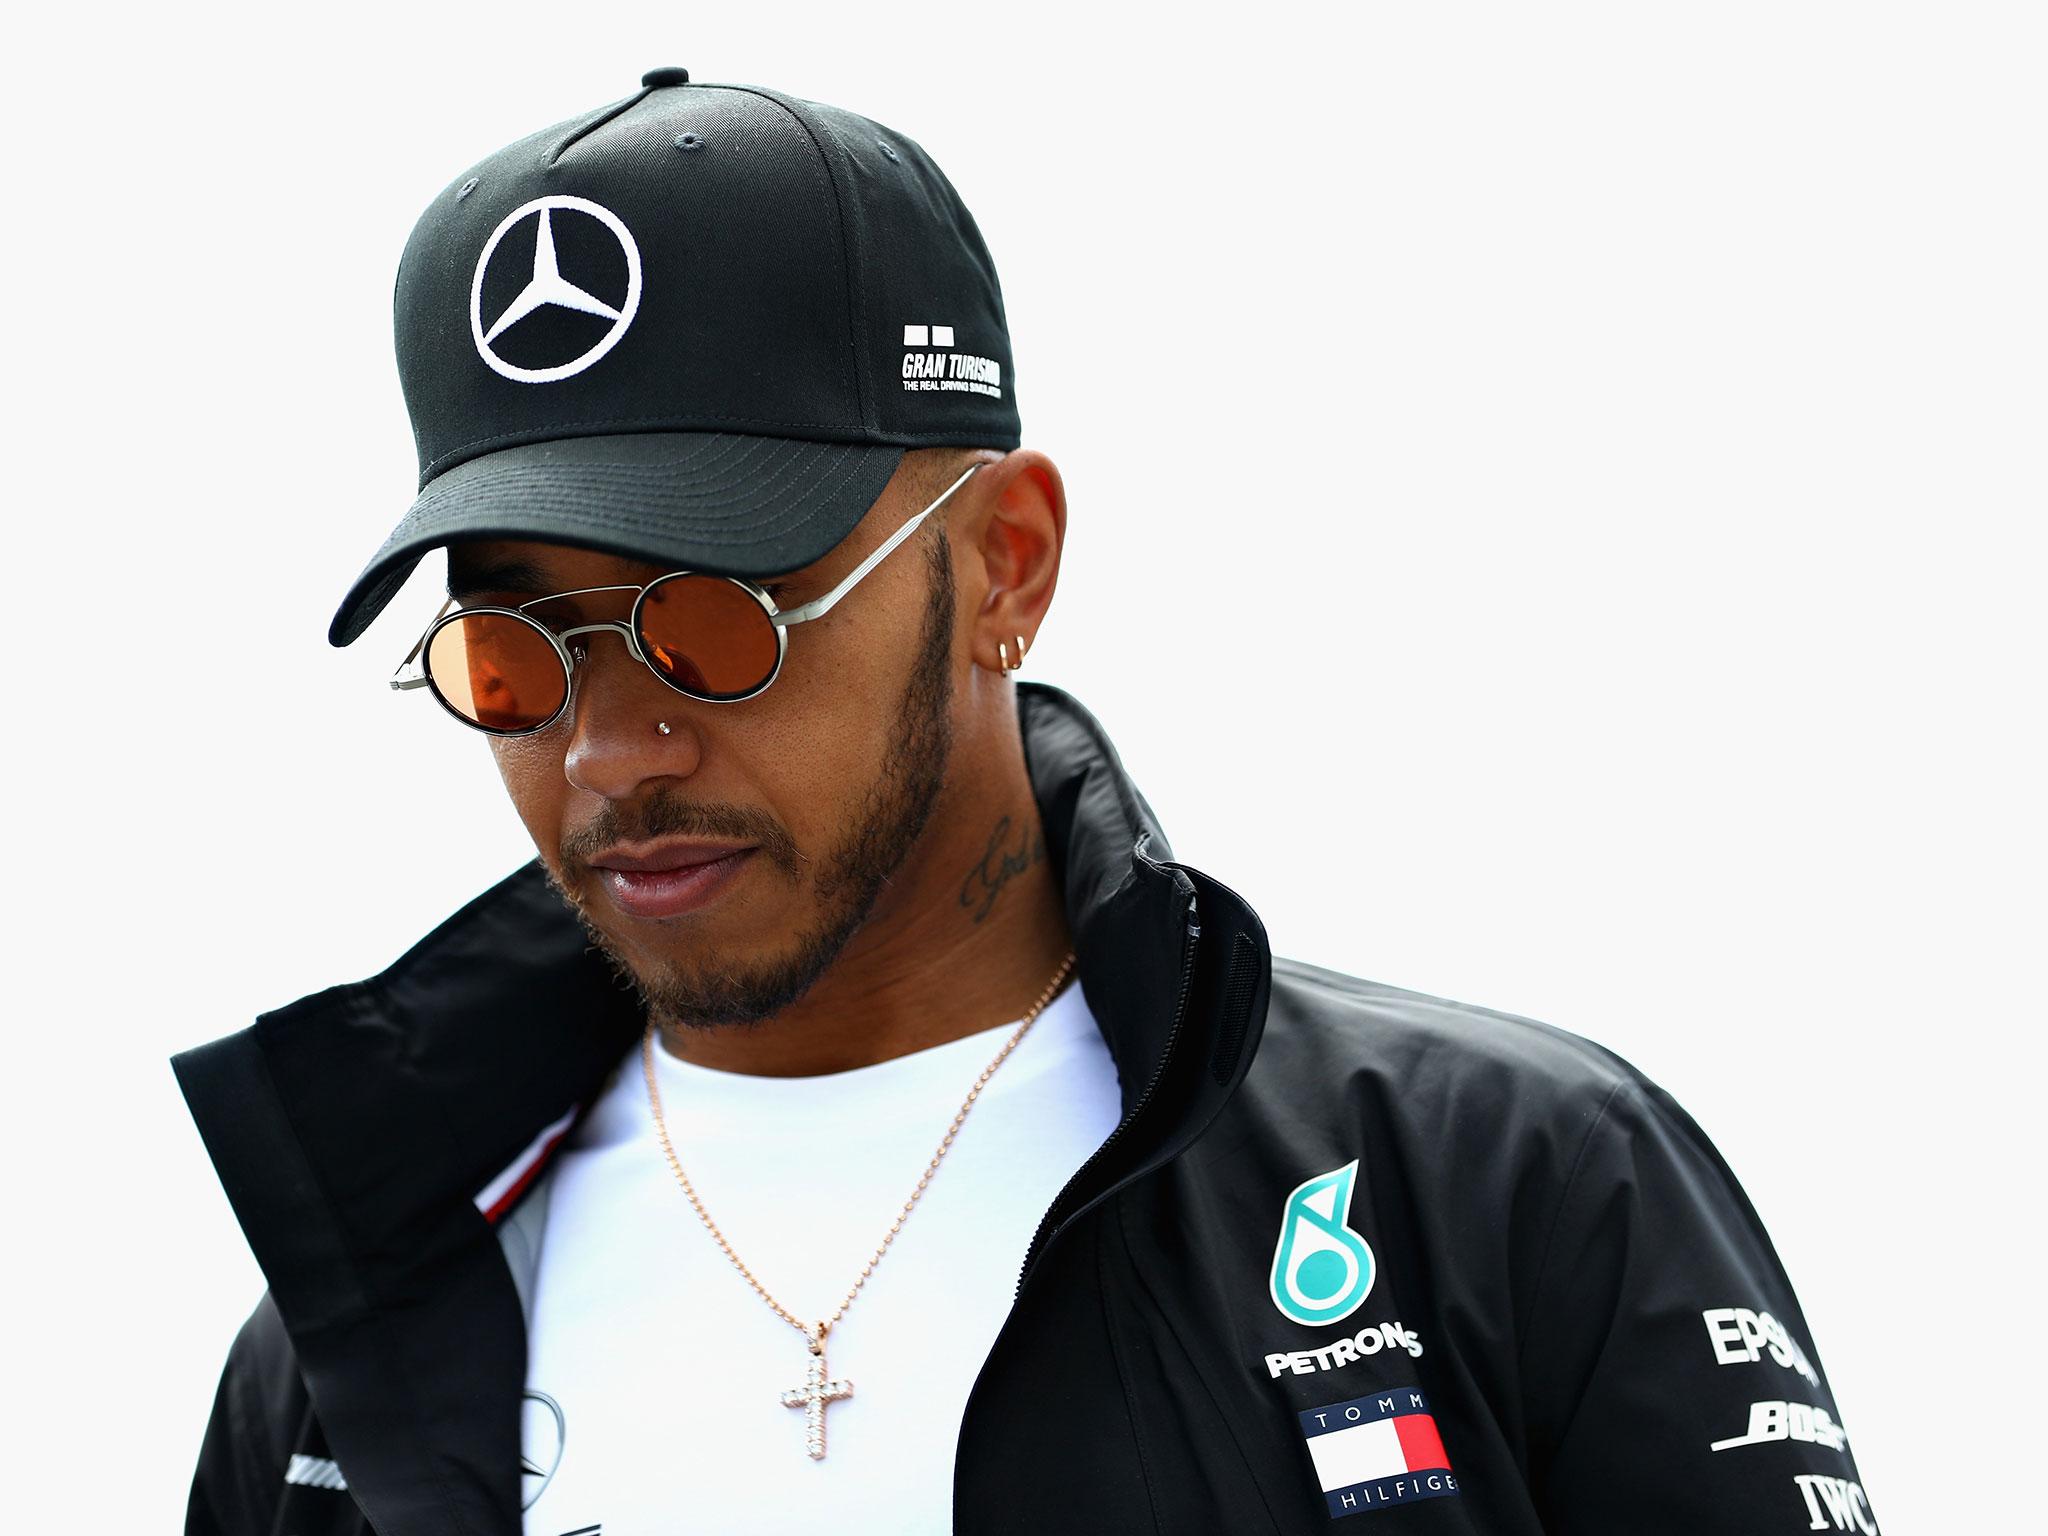 Hamilton fears he could be off the pace this weekend